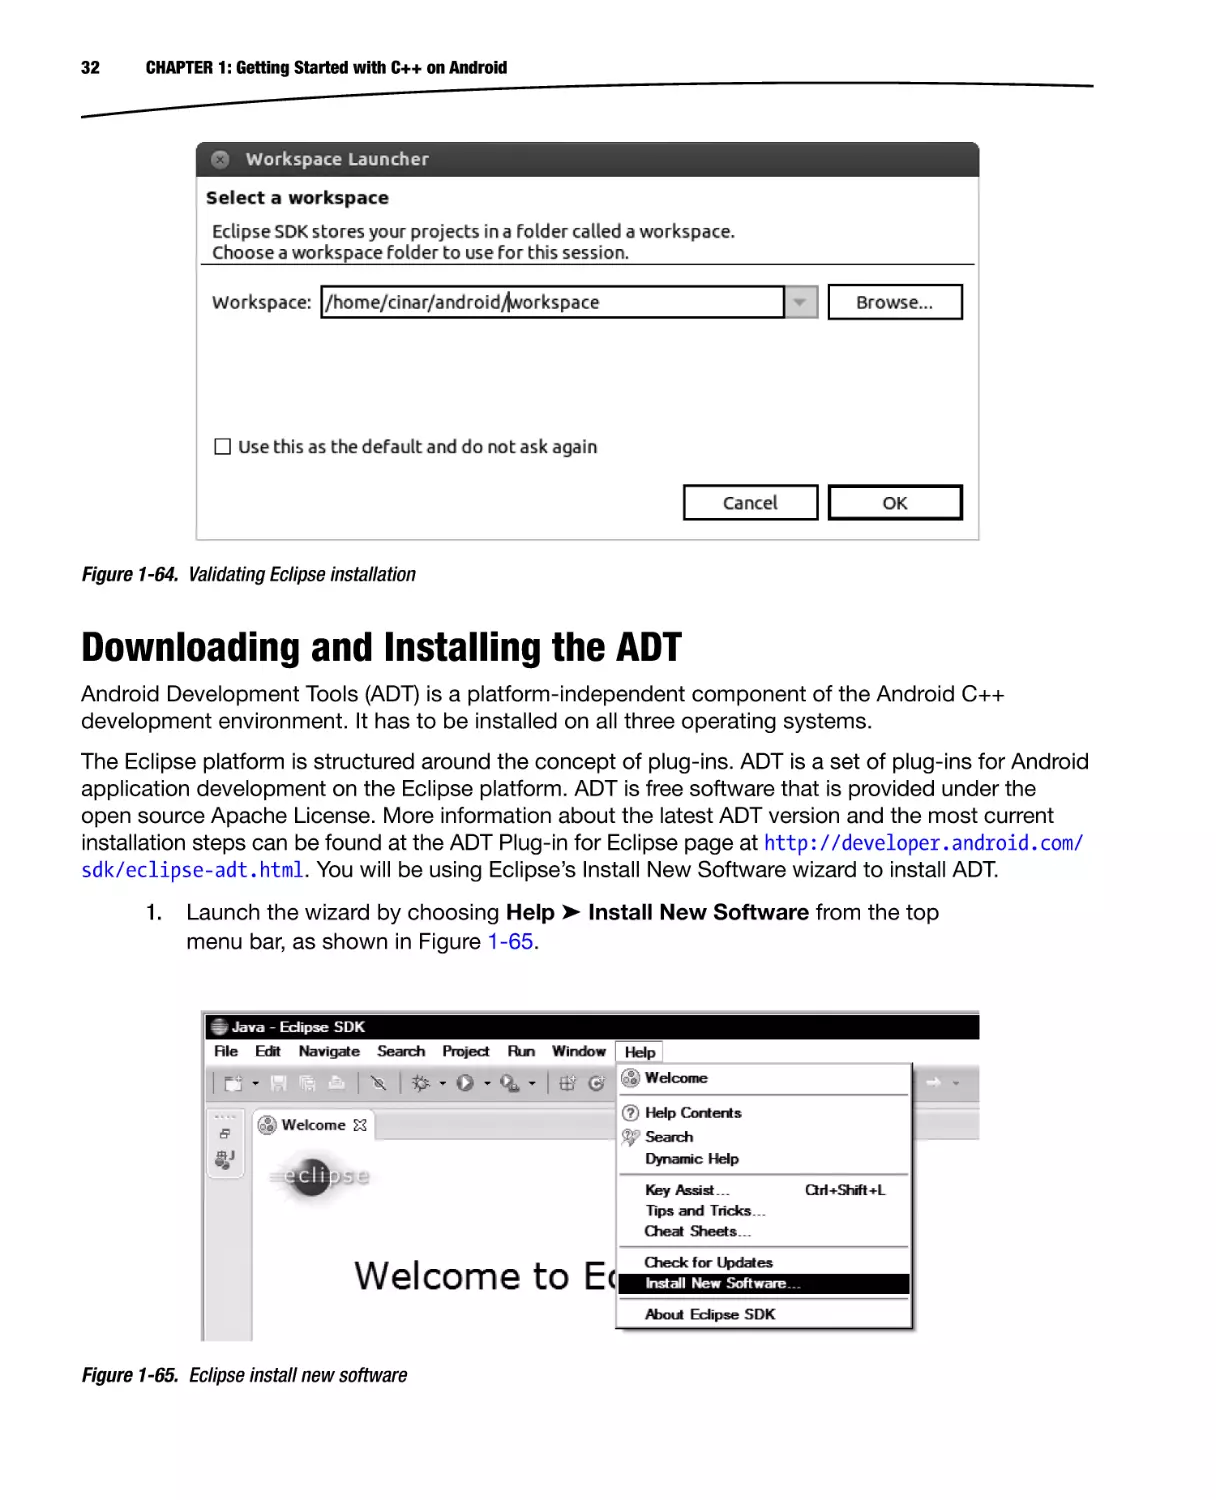 Downloading and Installing the ADT